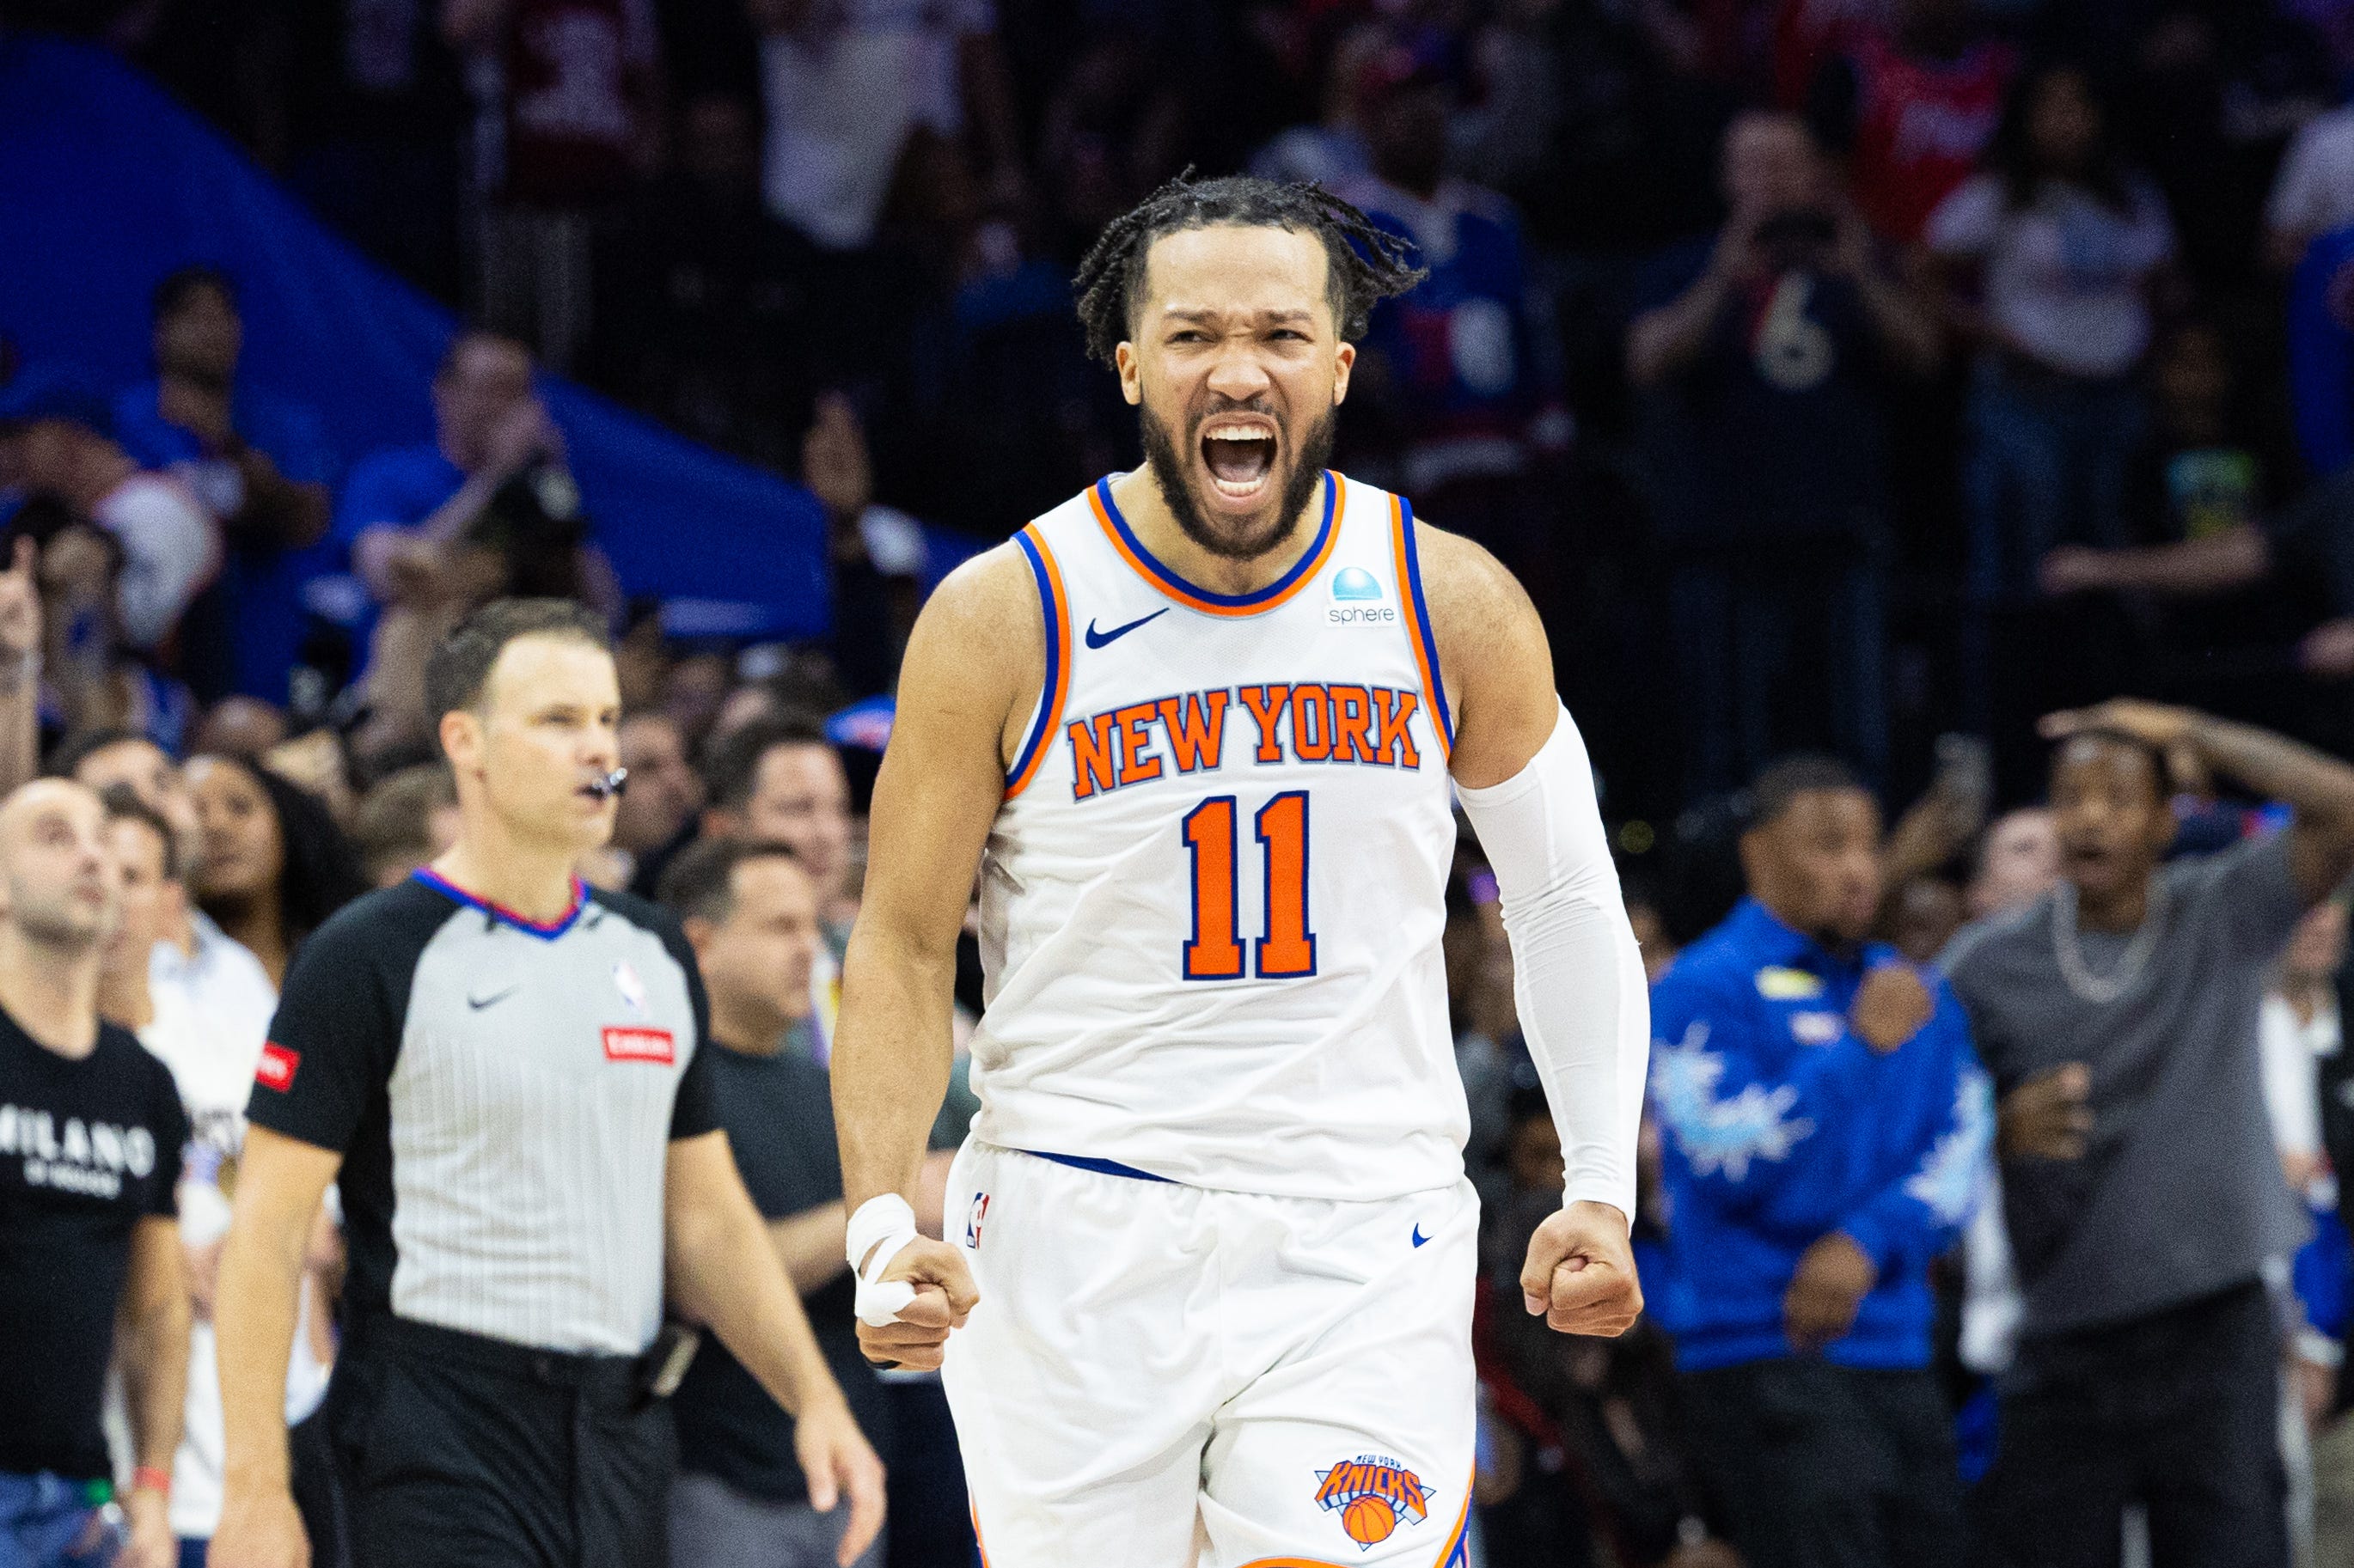 jalen brunson is a true superstar who can take knicks where they haven't been in decades